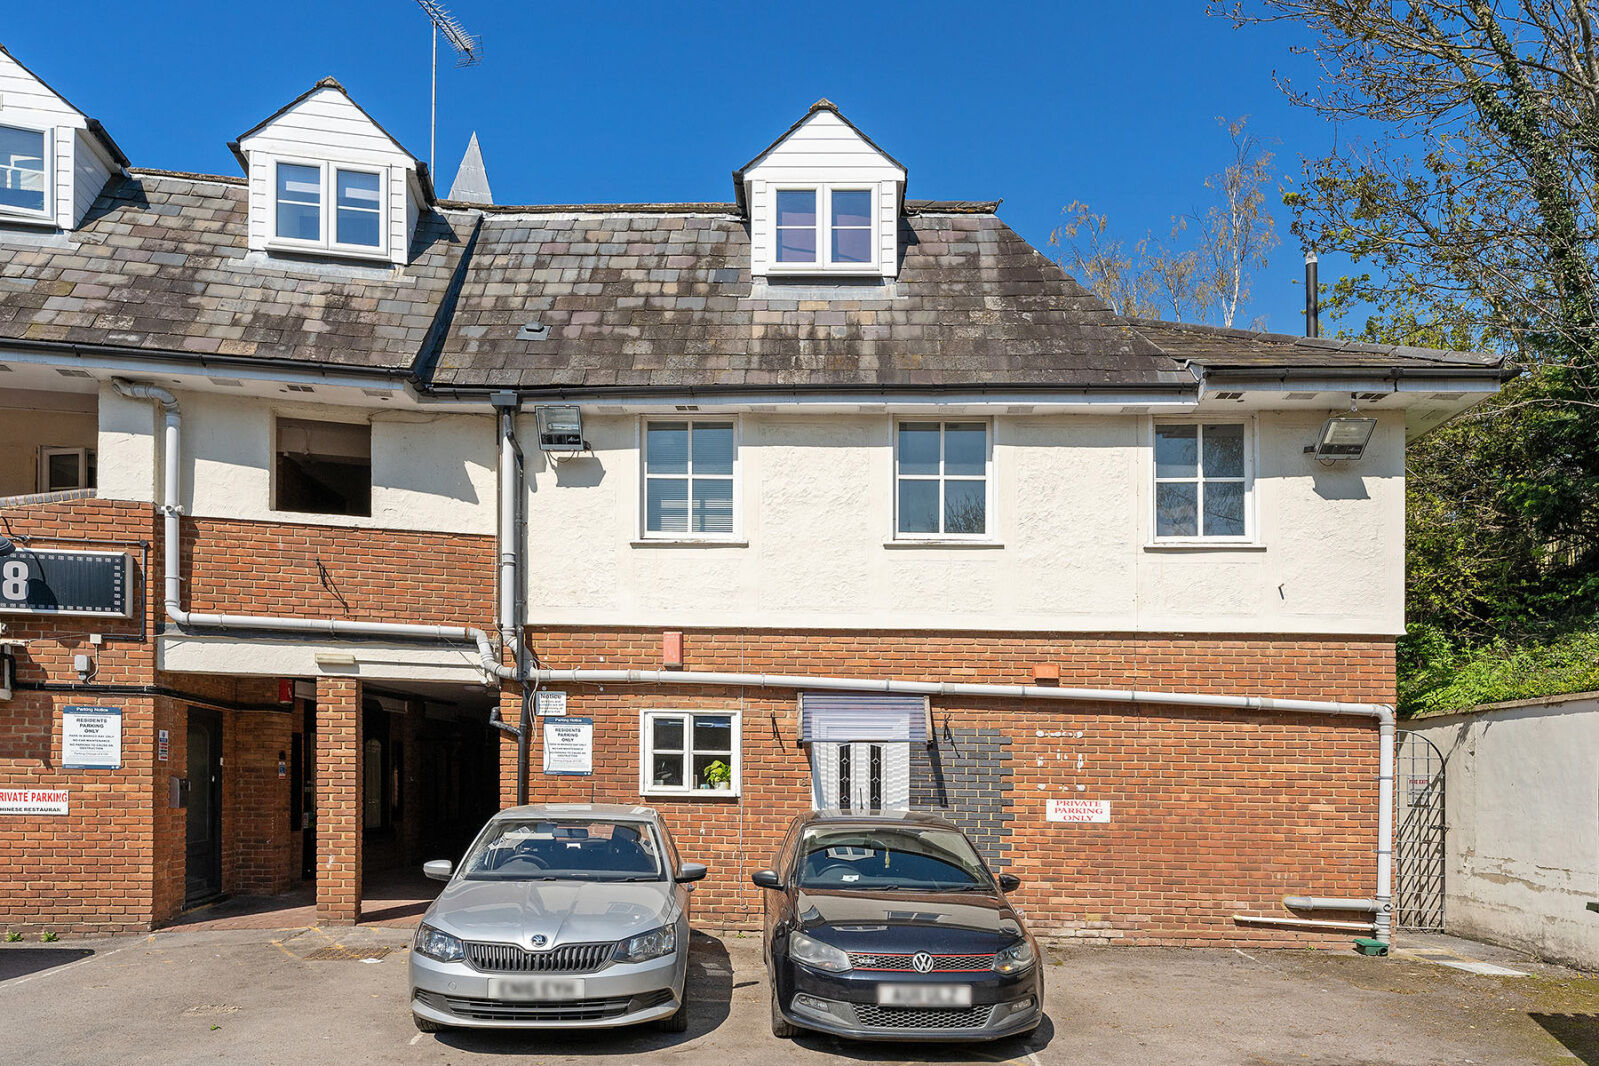 2 bedroom  flat for sale Lower Street, Stansted, CM24, main image